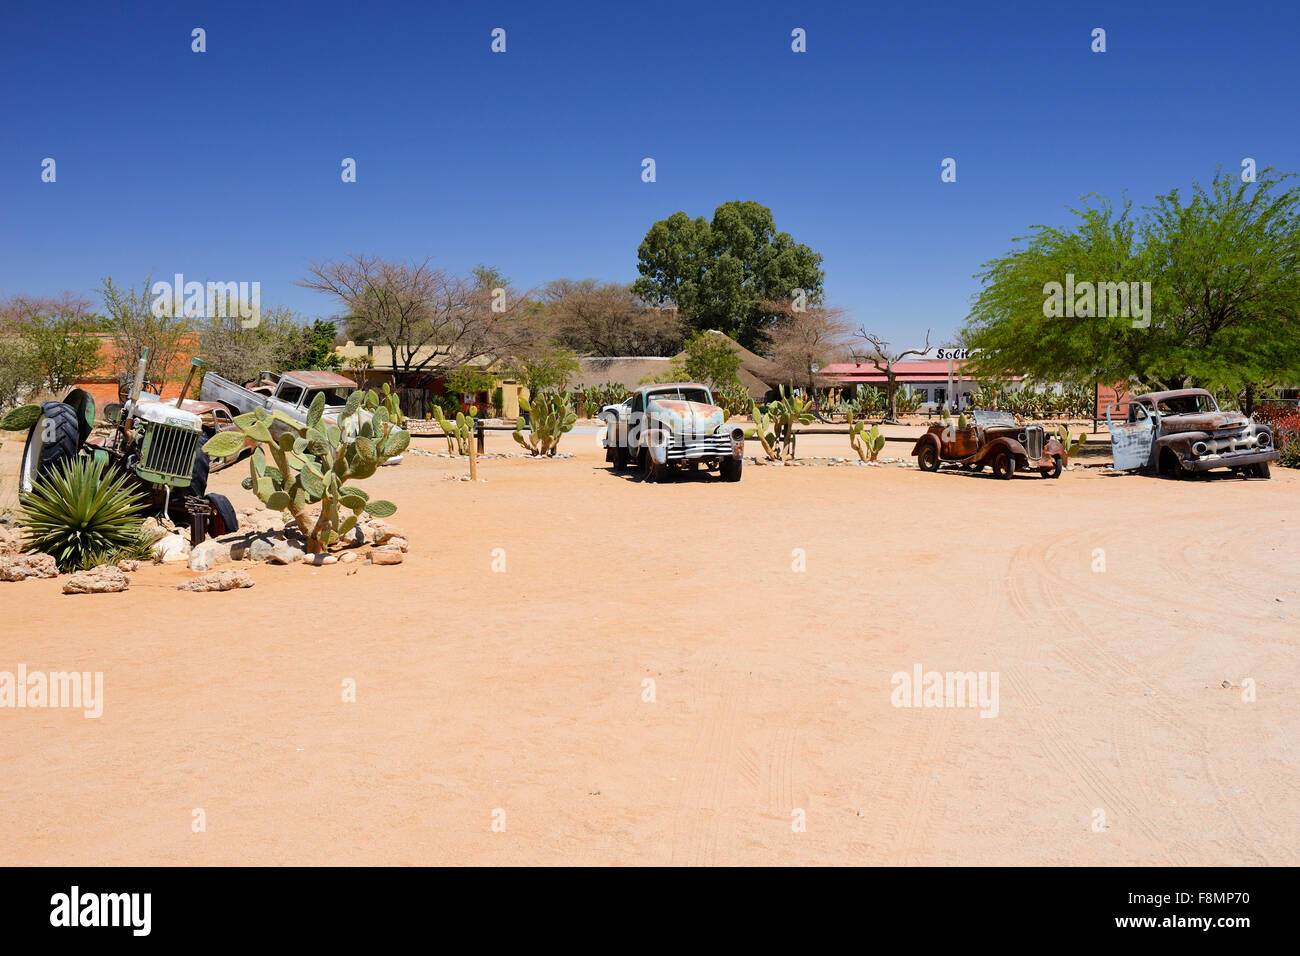 Abandoned vehicles at entrance to desert town of Solitaire, Namibia Stock Photo